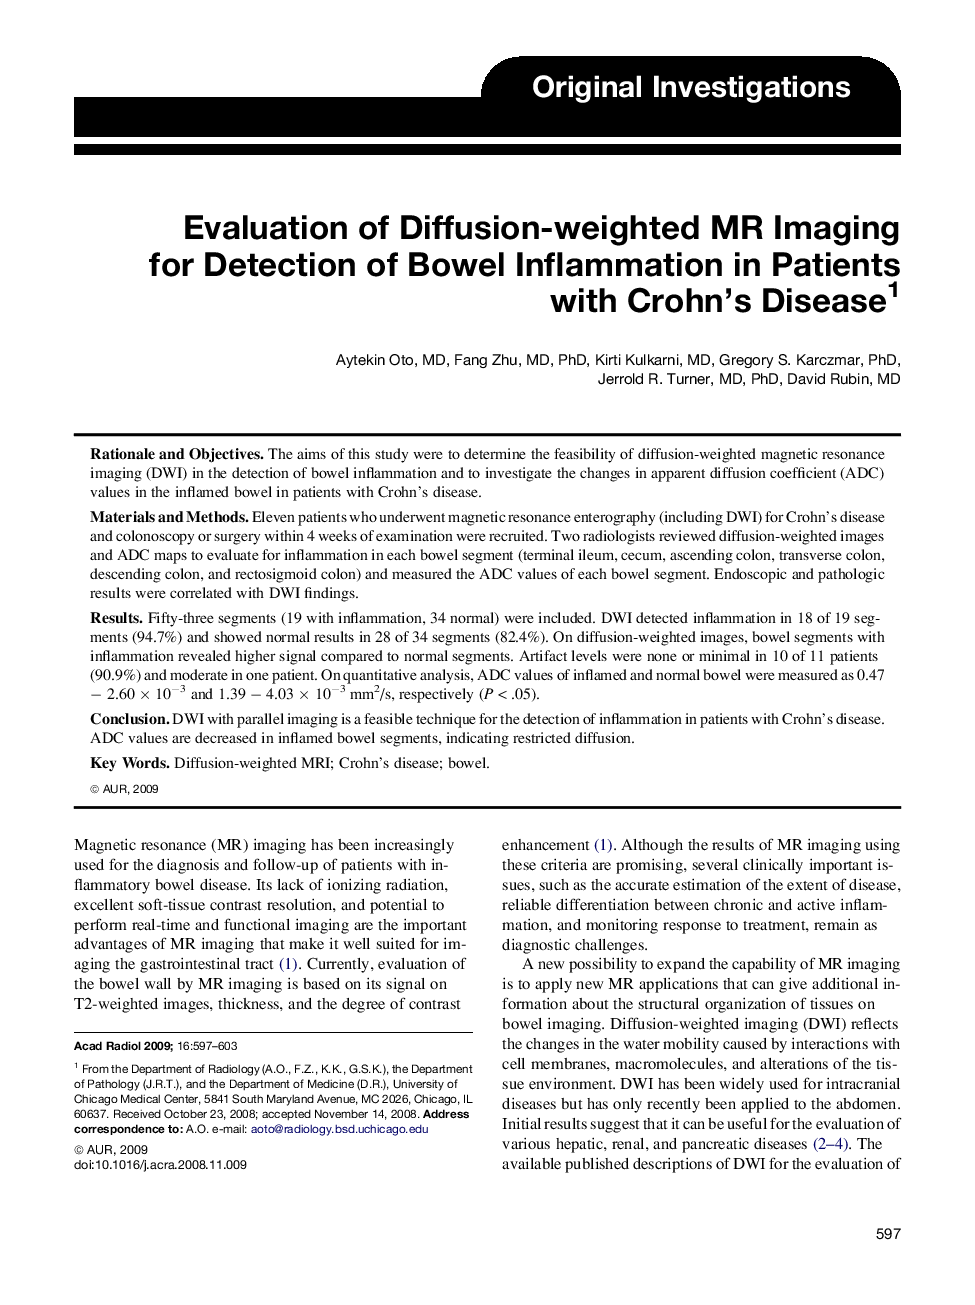 Evaluation of Diffusion-weighted MR Imaging for Detection of Bowel Inflammation in Patients with Crohn's Disease